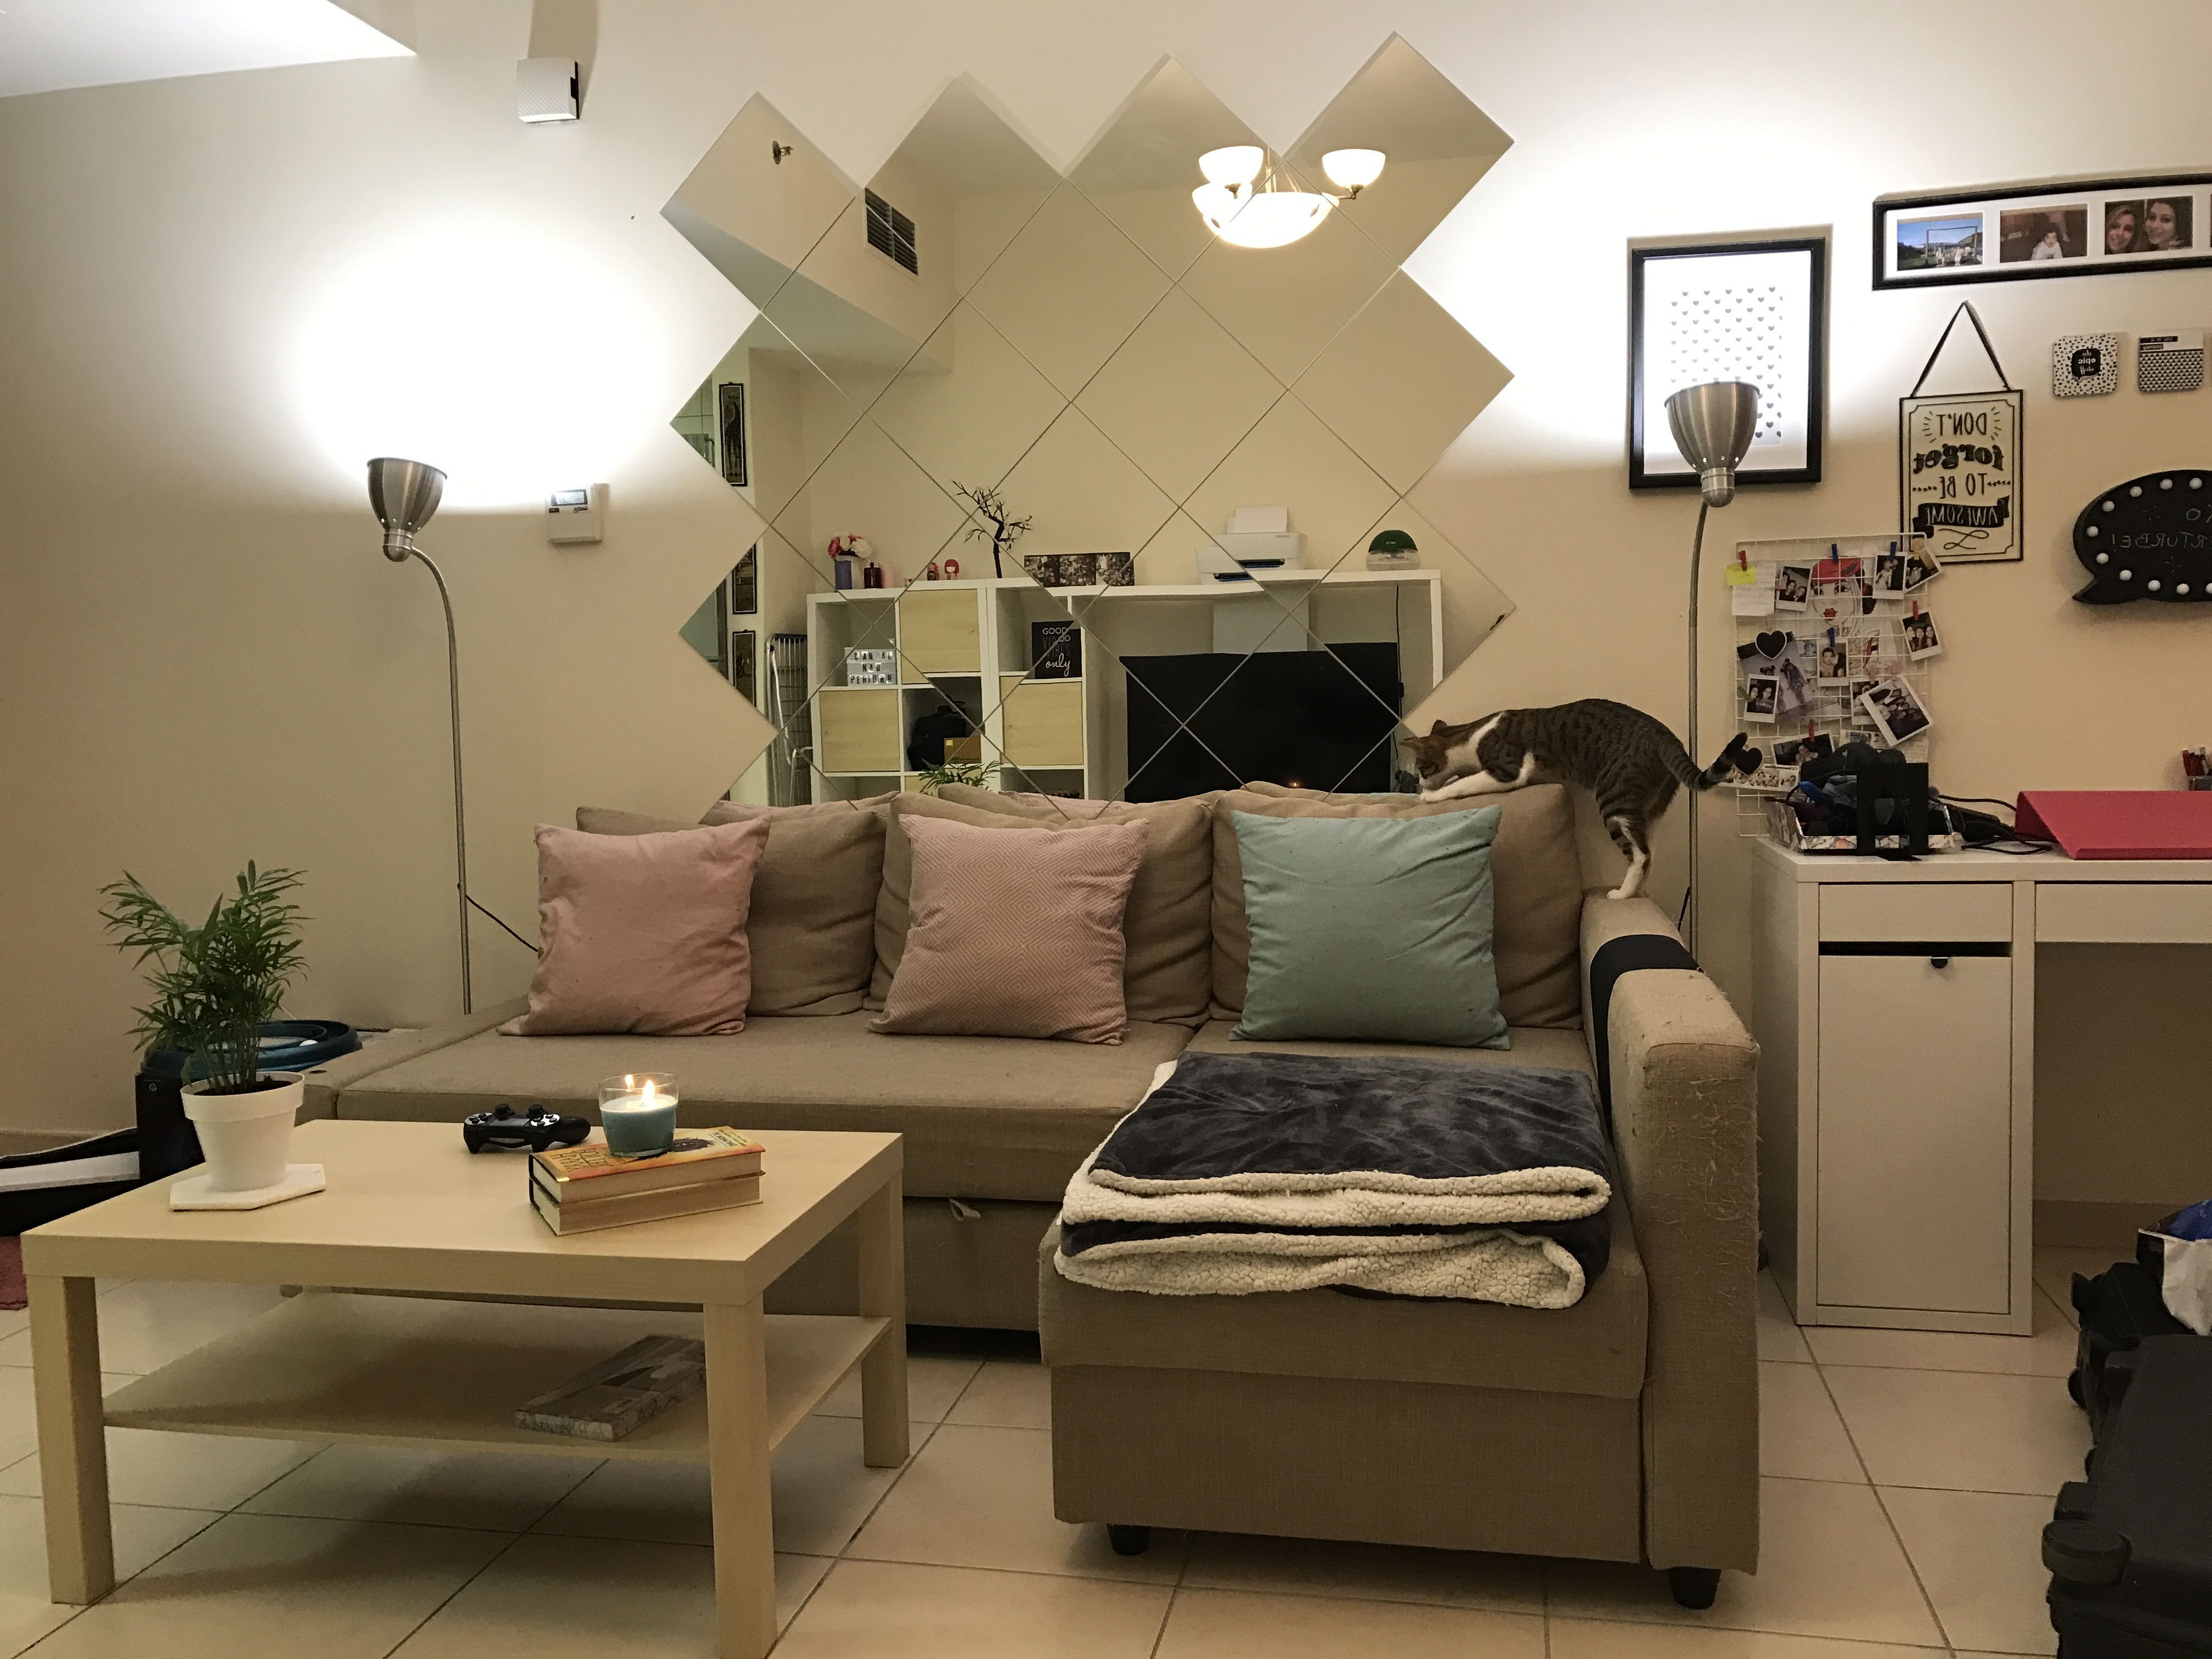 2019 Ikea Wall Mirrors In Mirror Wall With Ikea Lots (View 9 of 20)